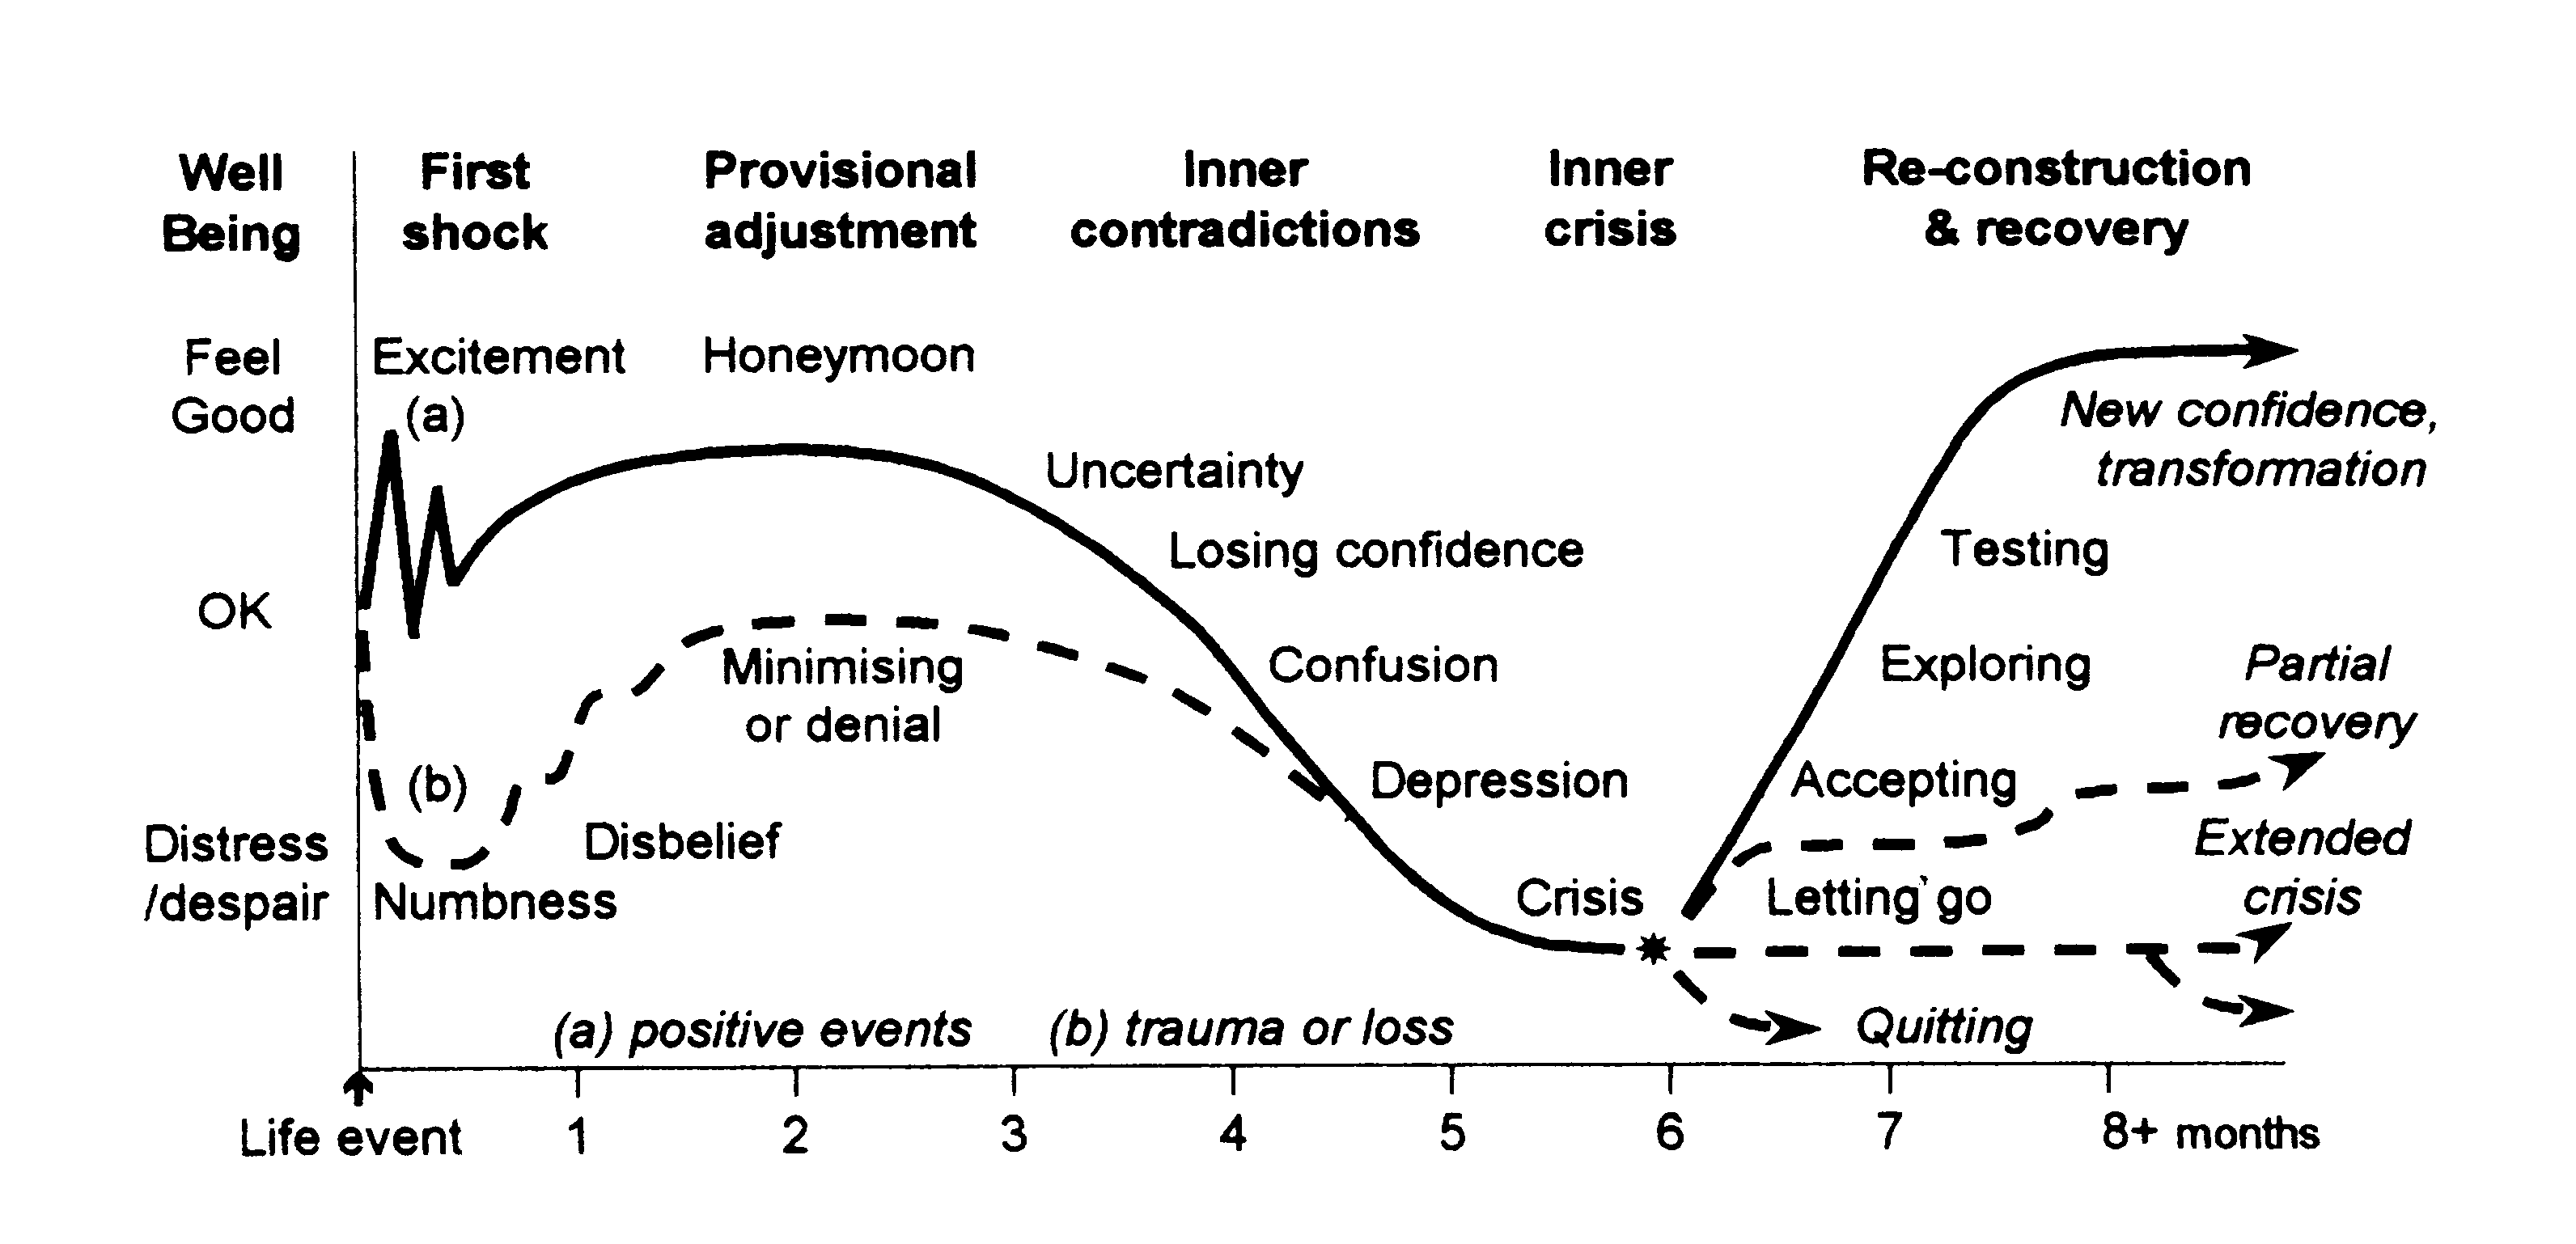 Model outlining the cylce of transition theory along a continuum of life events and well-being